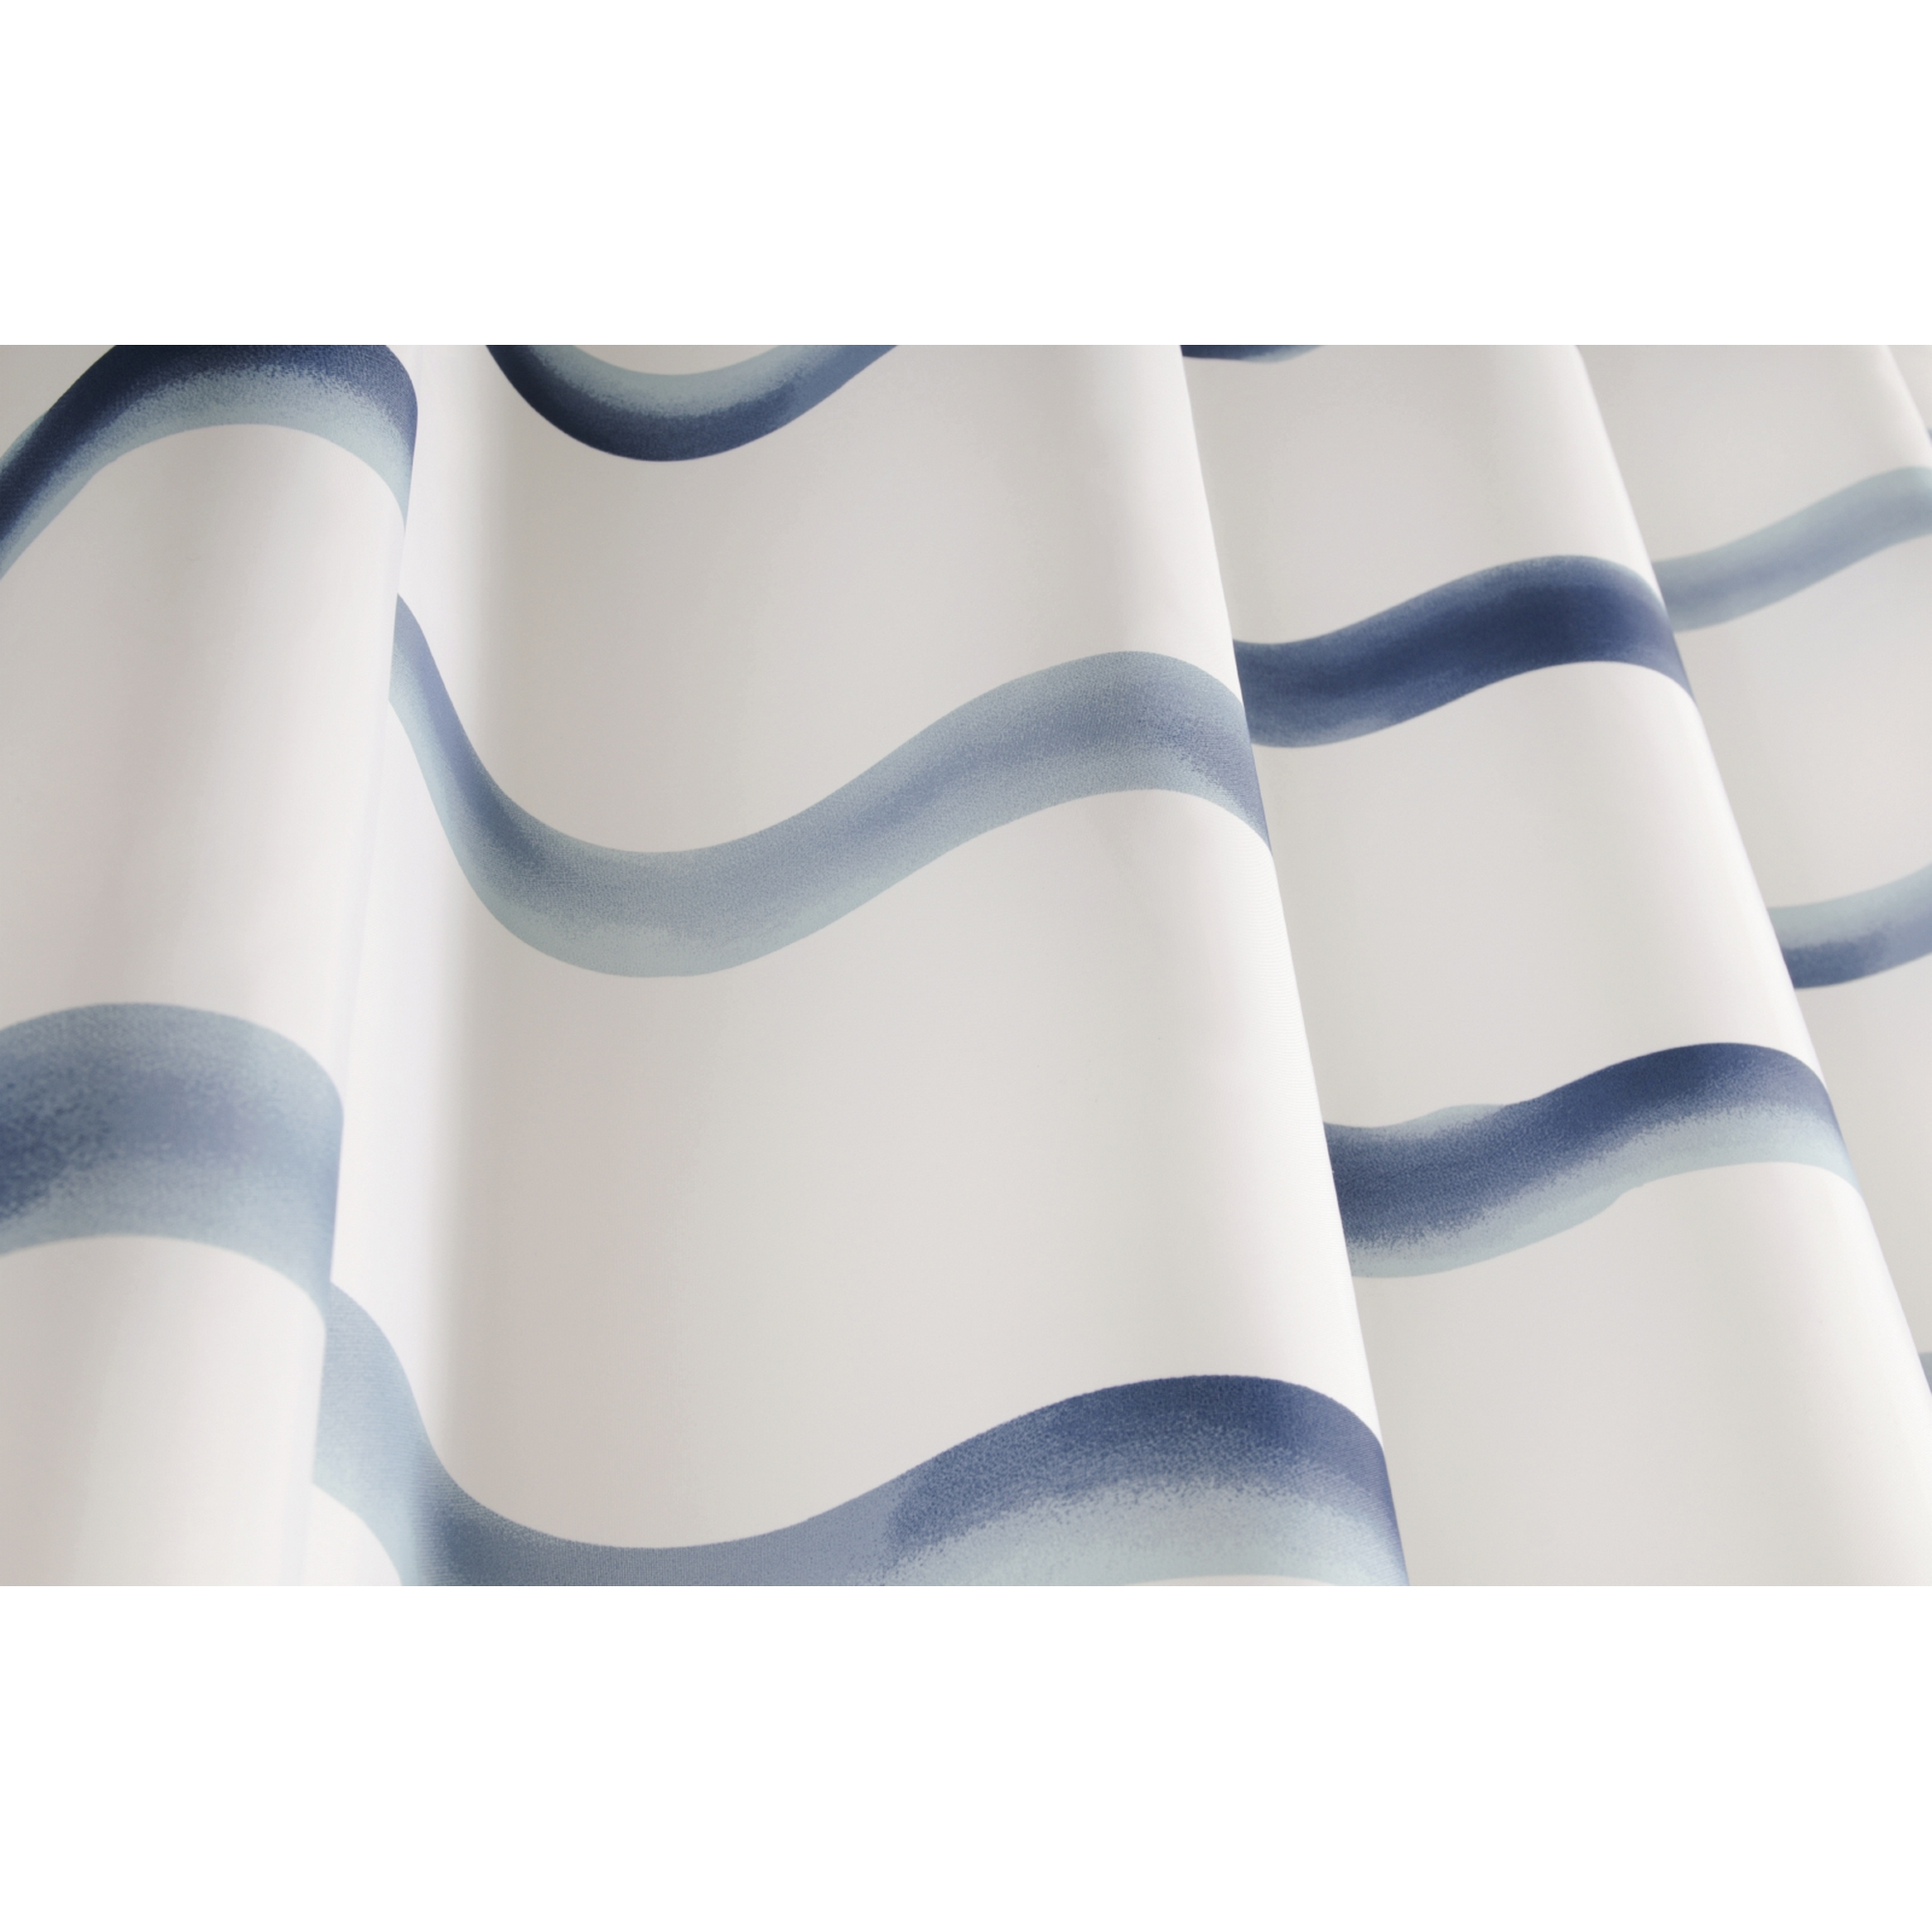 Duschvorhang 'Windsee' Textil weiss-blau 180 x 200 cm + product picture